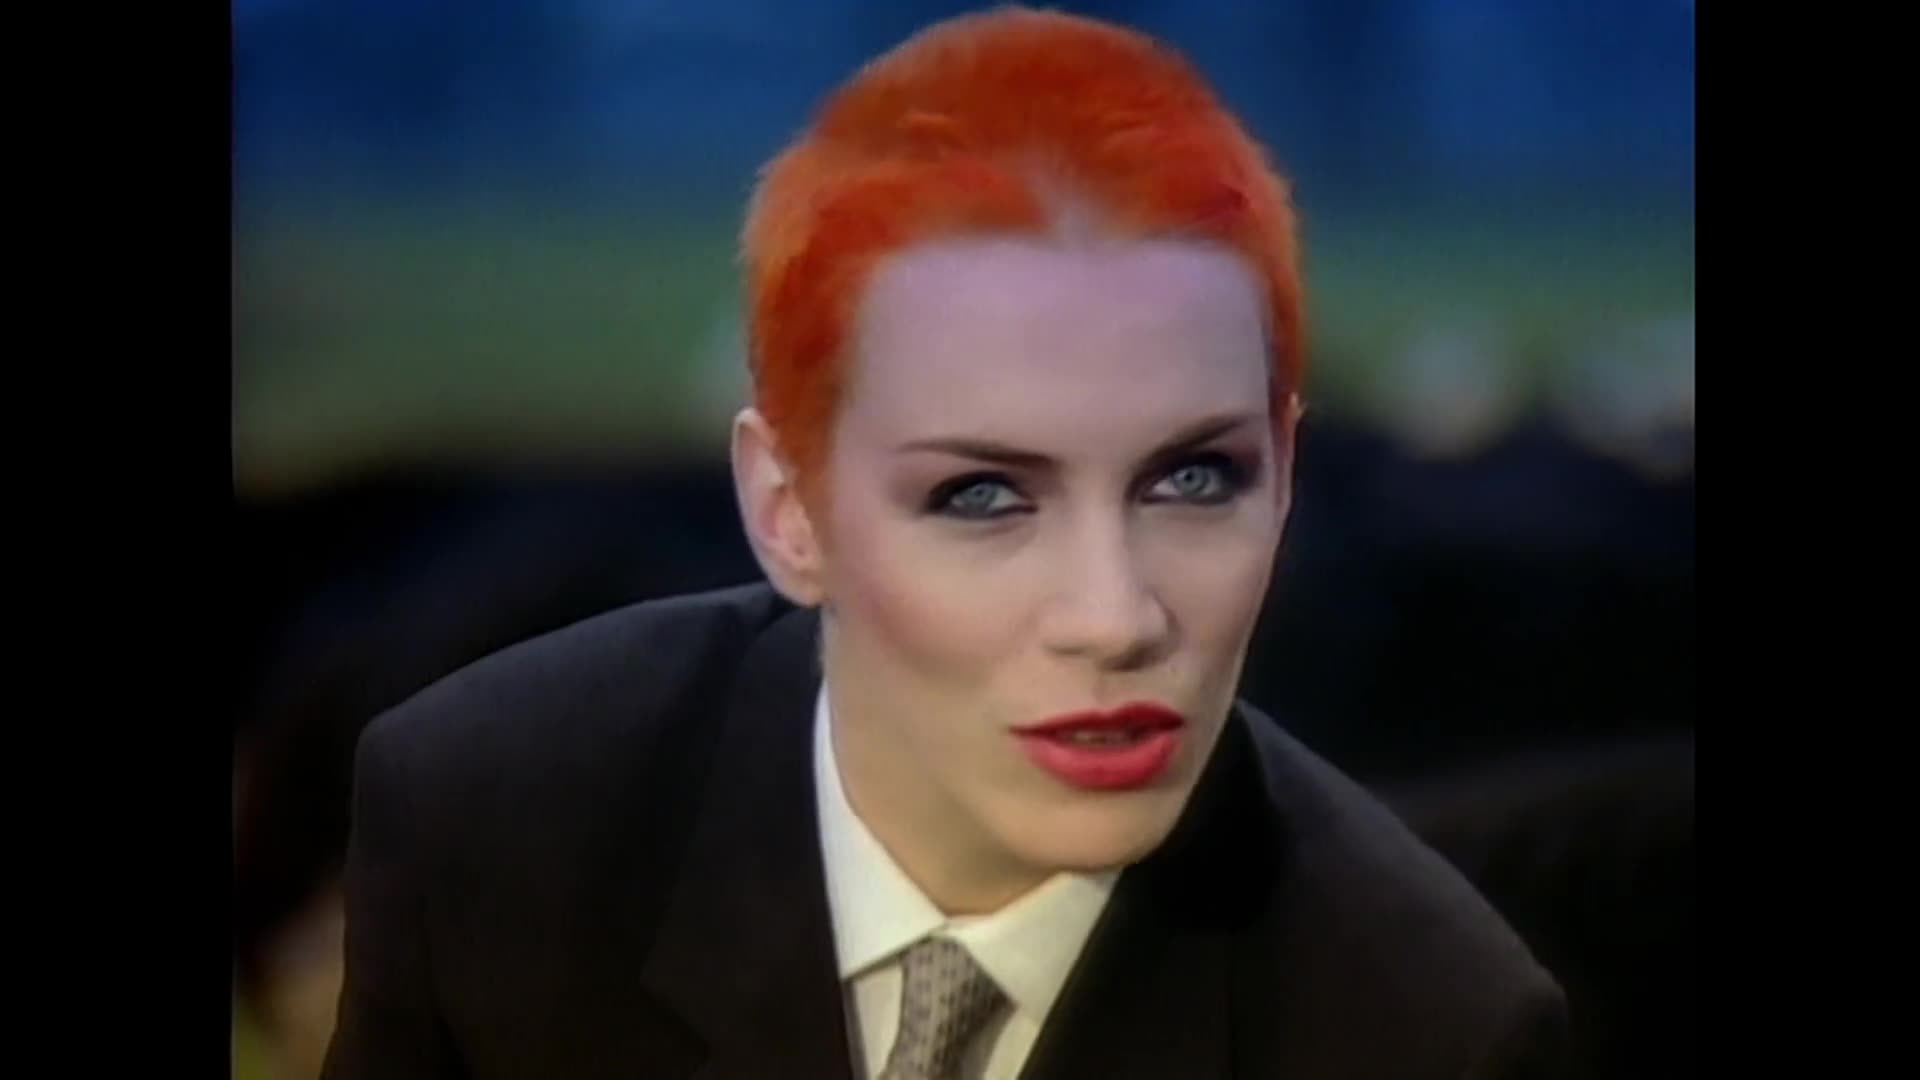 Eurythmics, Annie Lennox, Dave Stewart - Sweet Dreams (Are Made Of